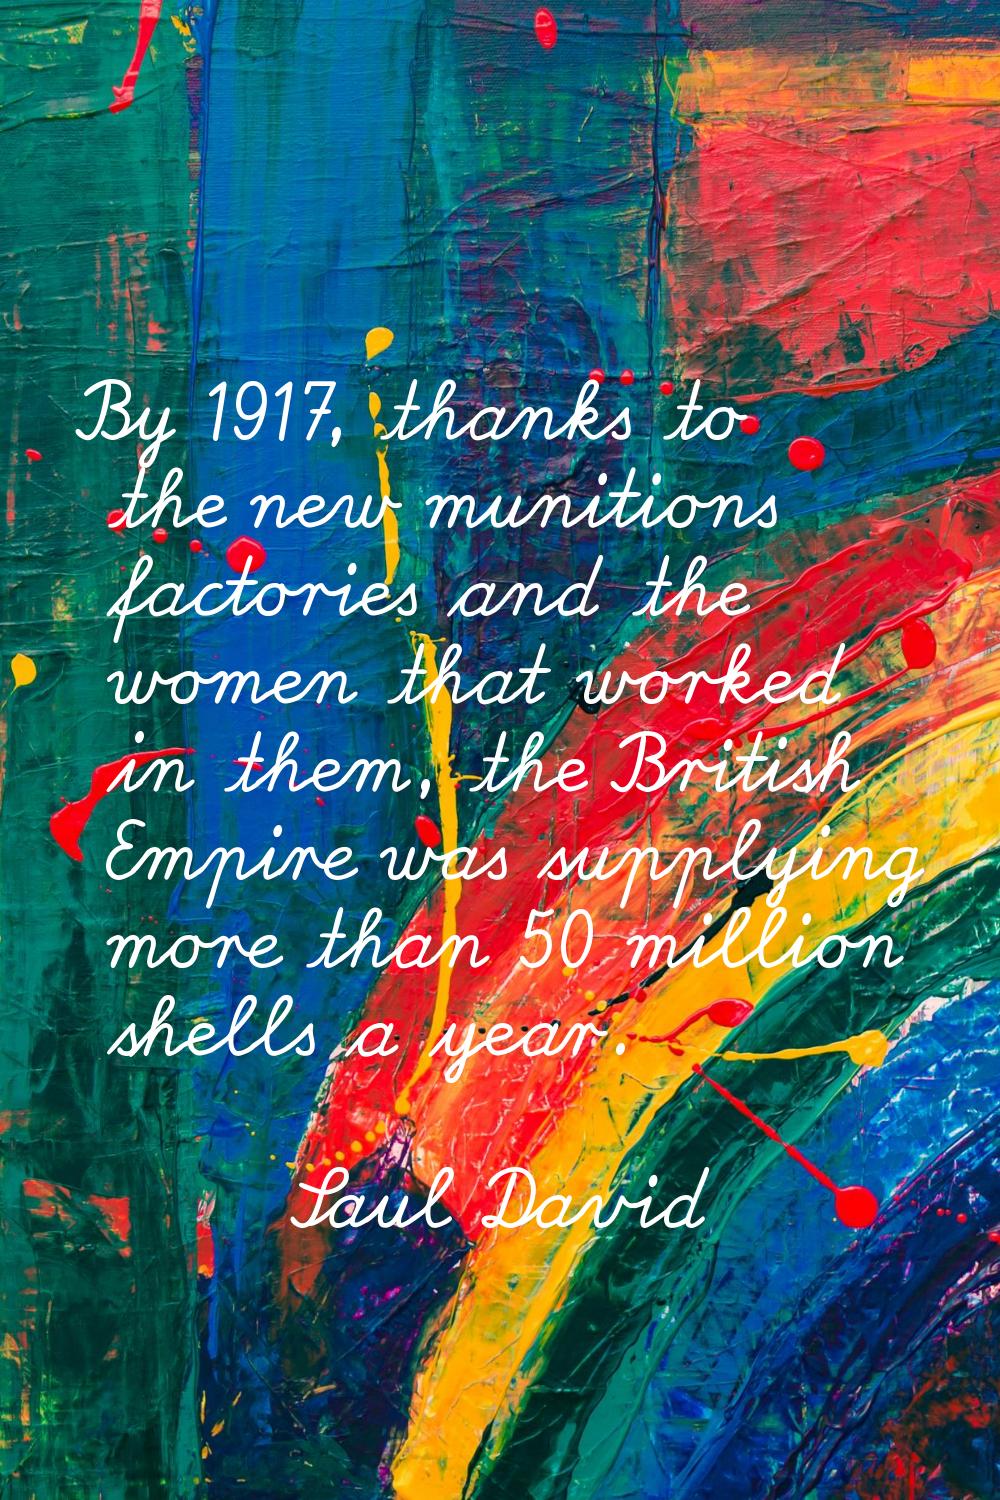 By 1917, thanks to the new munitions factories and the women that worked in them, the British Empir